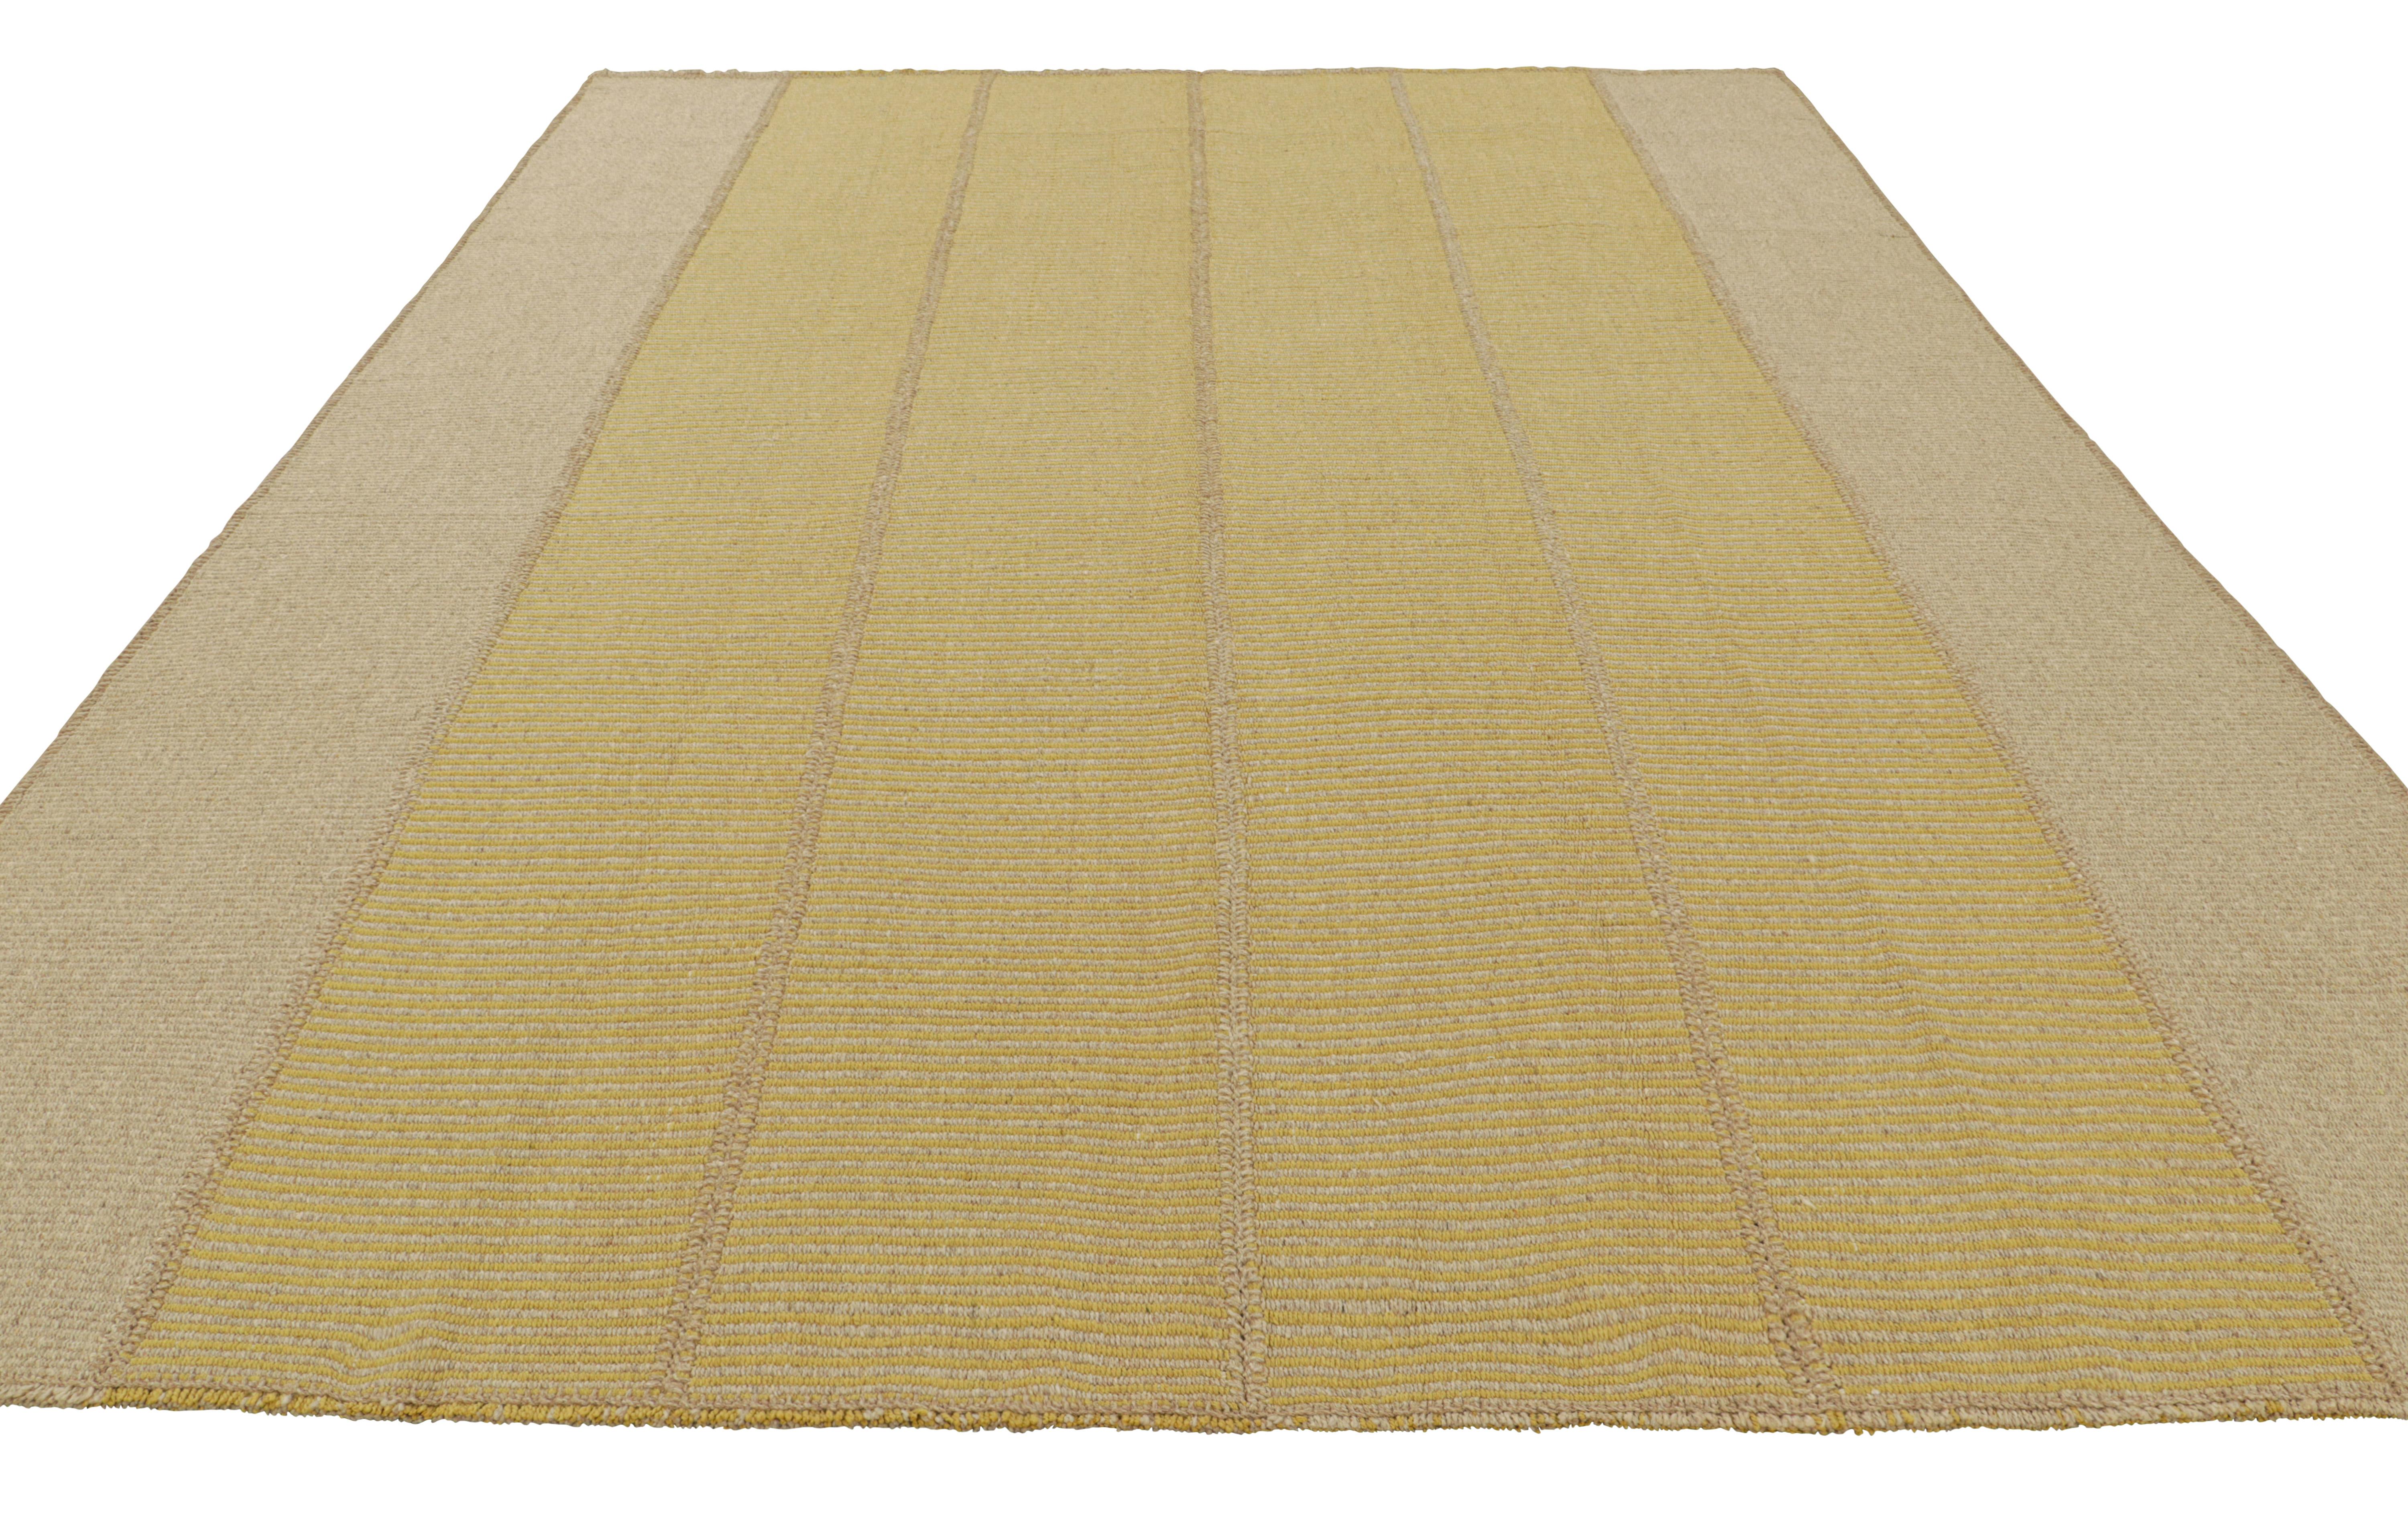 Hand-Woven Rug & Kilim’s Contemporary Kilim in Beige and Gold Textural Stripes For Sale